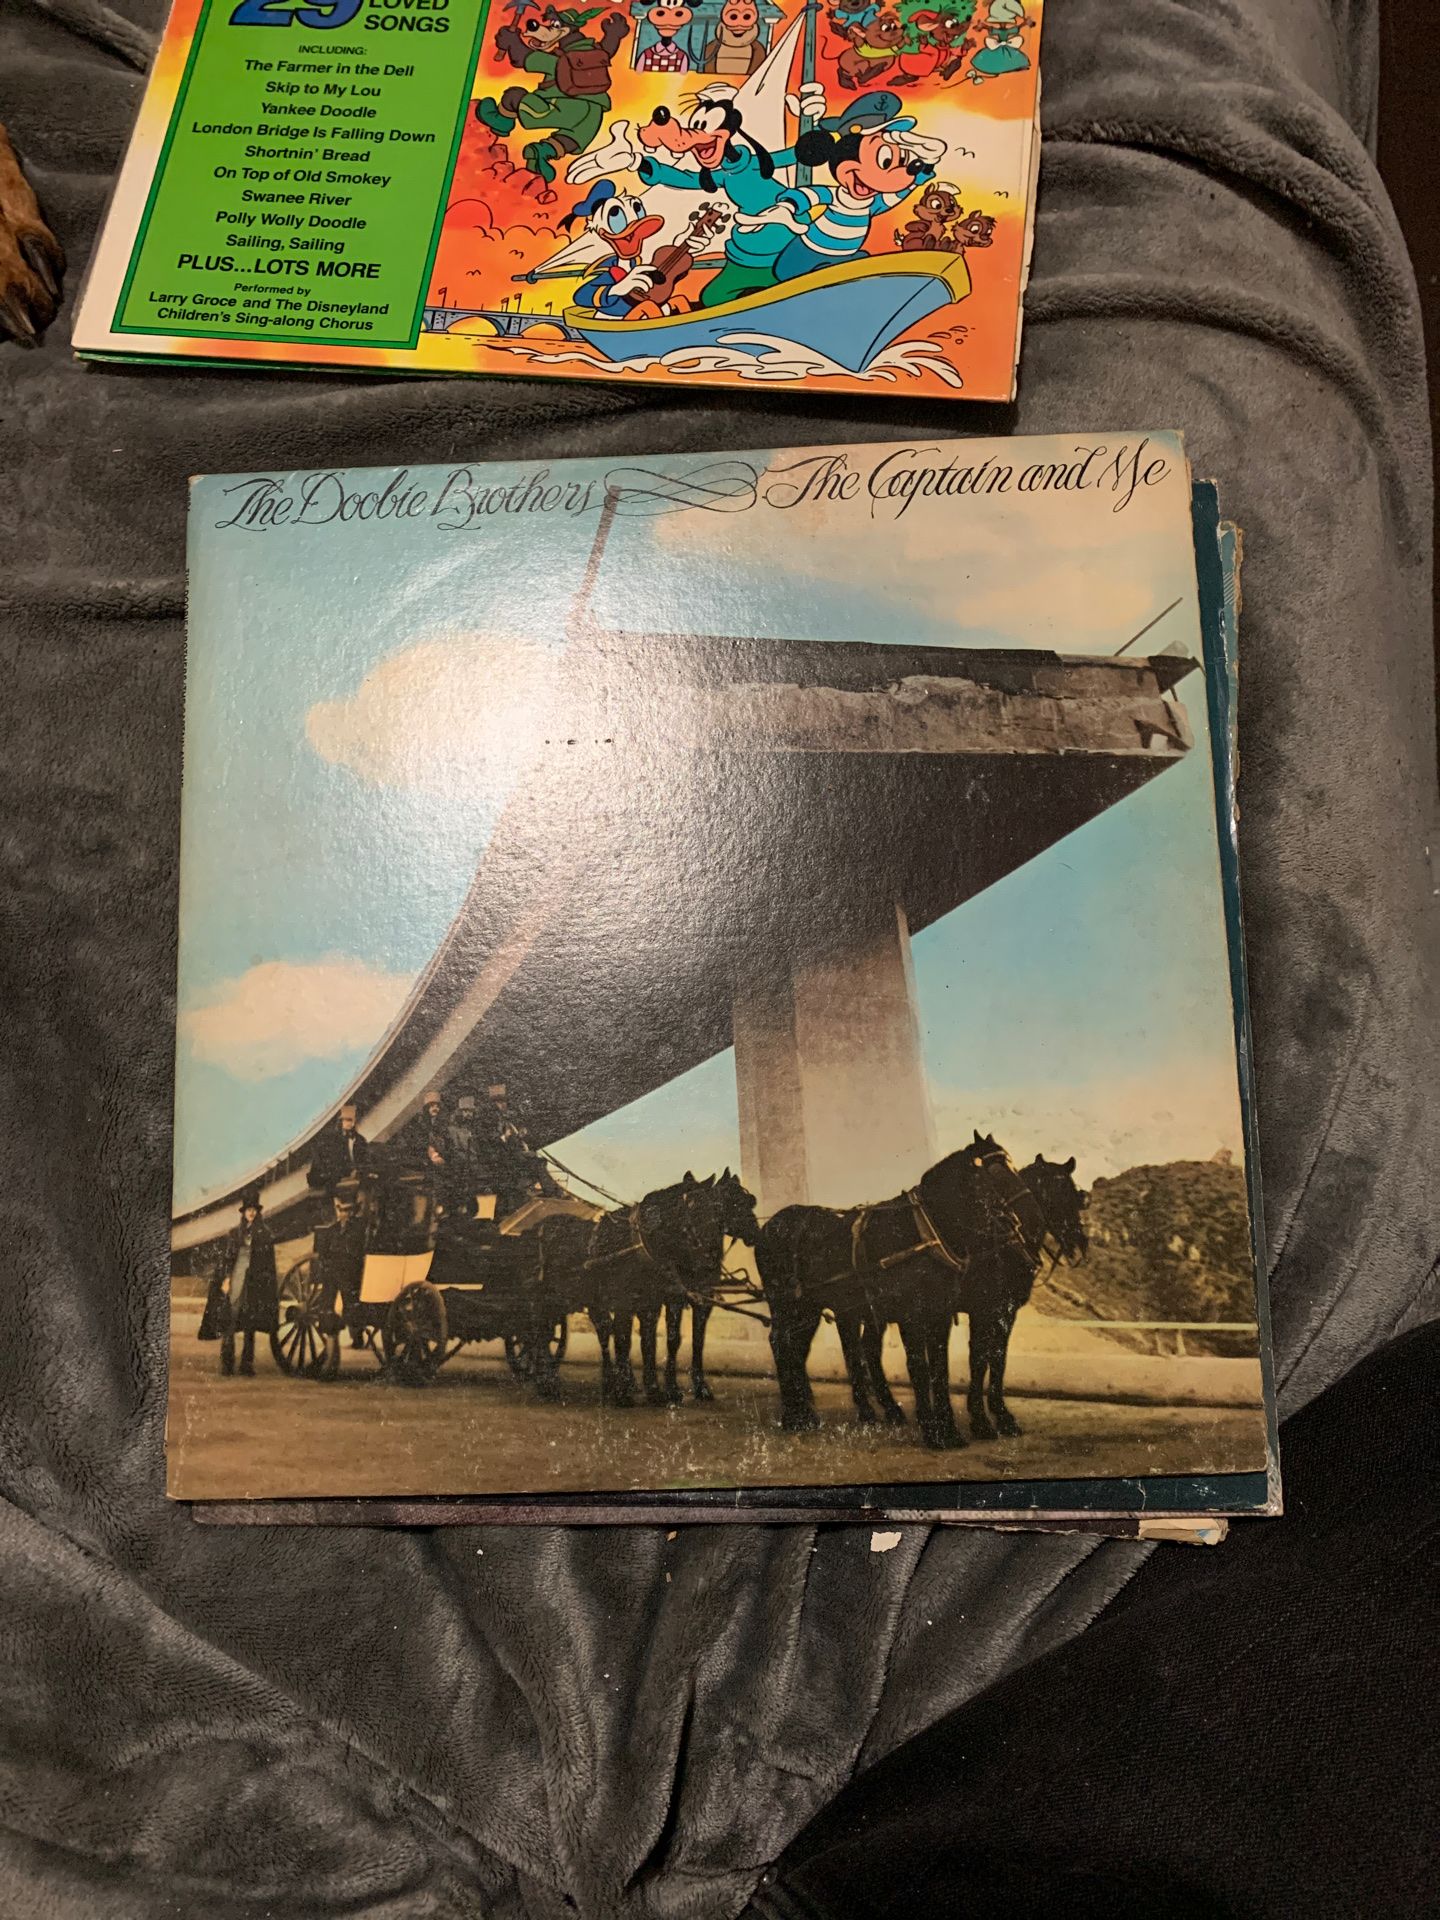 The doobie brothers The captain and me vinyl